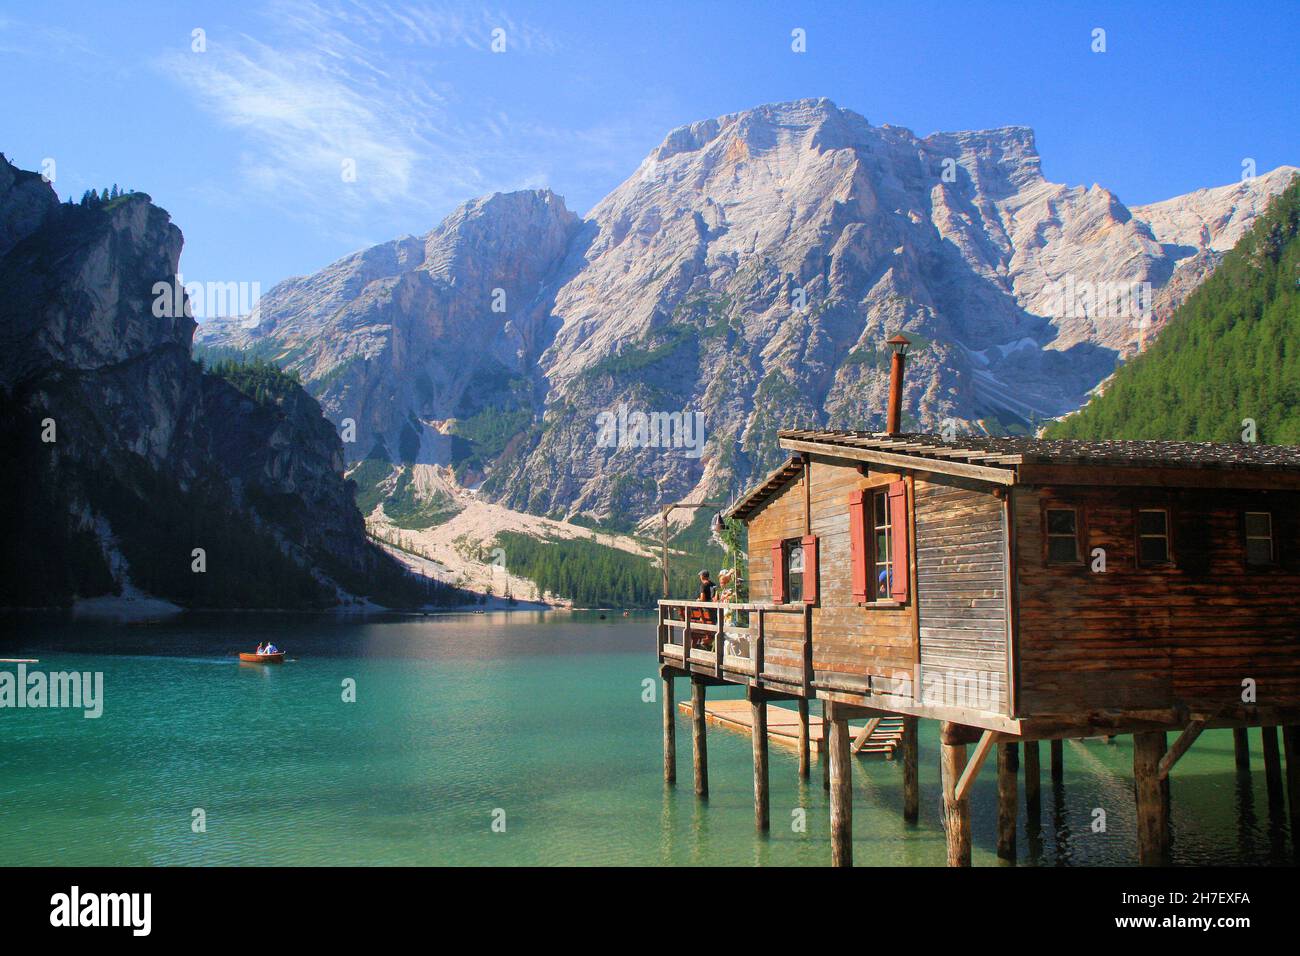 Landscape of Braies lake with surrounding mountains and wooden building (palafitte). Stock Photo